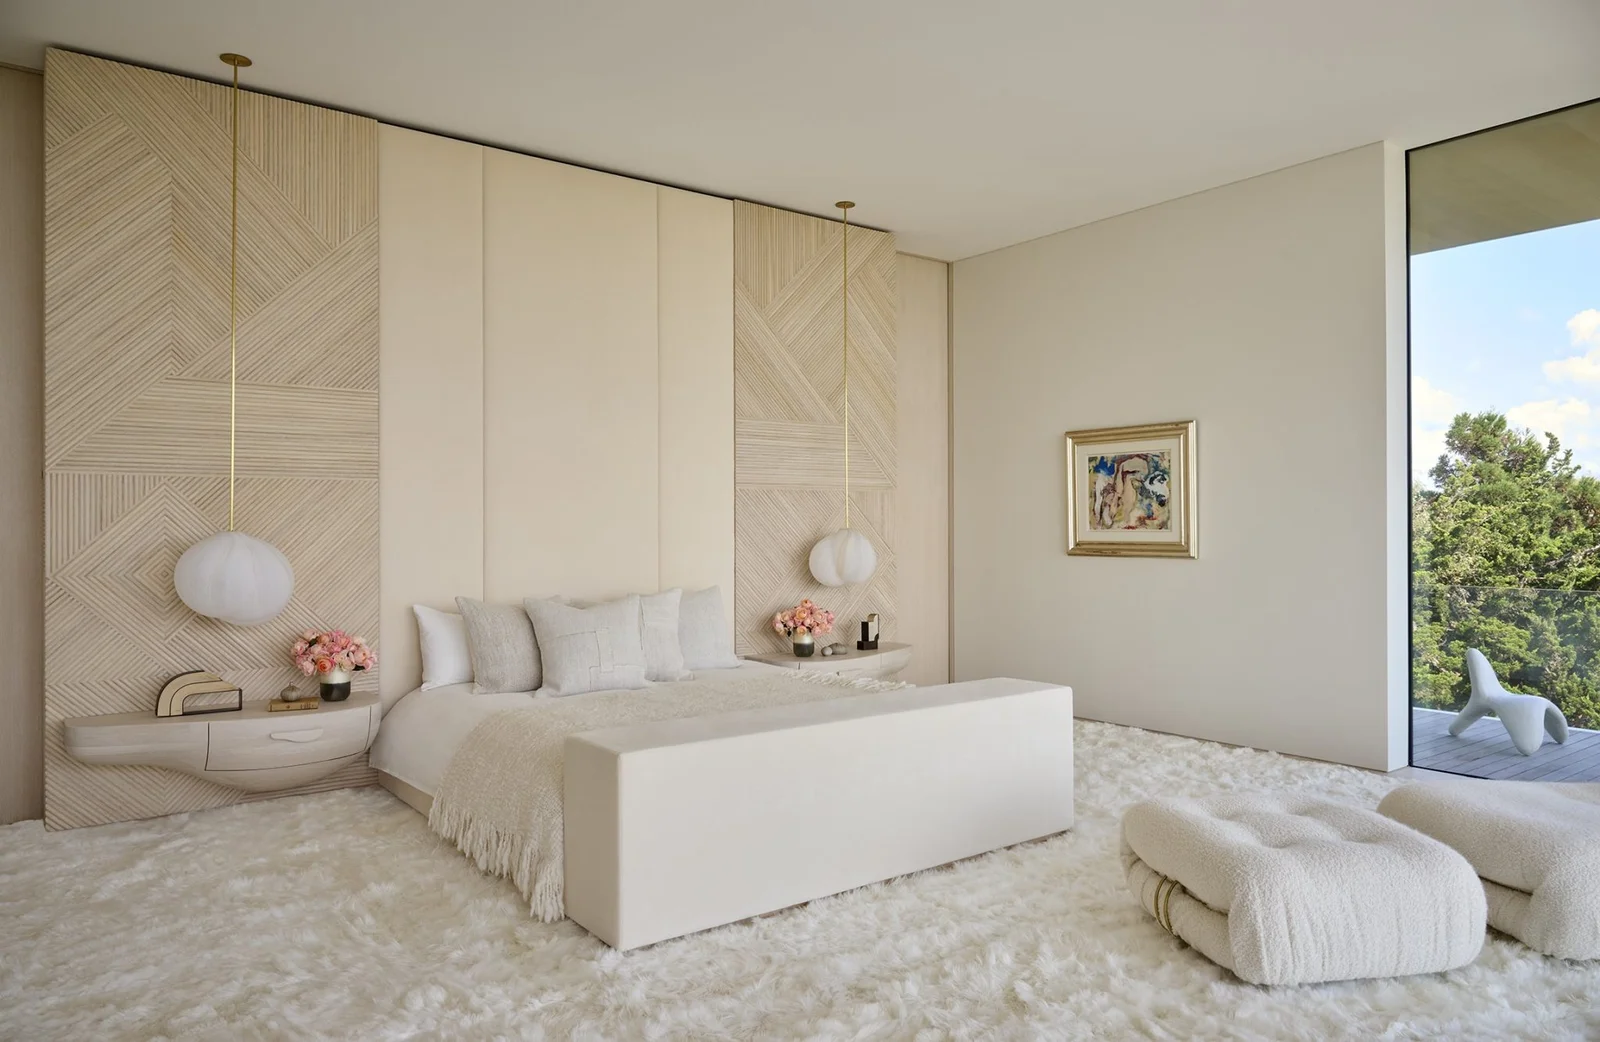 A serene bedroom with white furniture